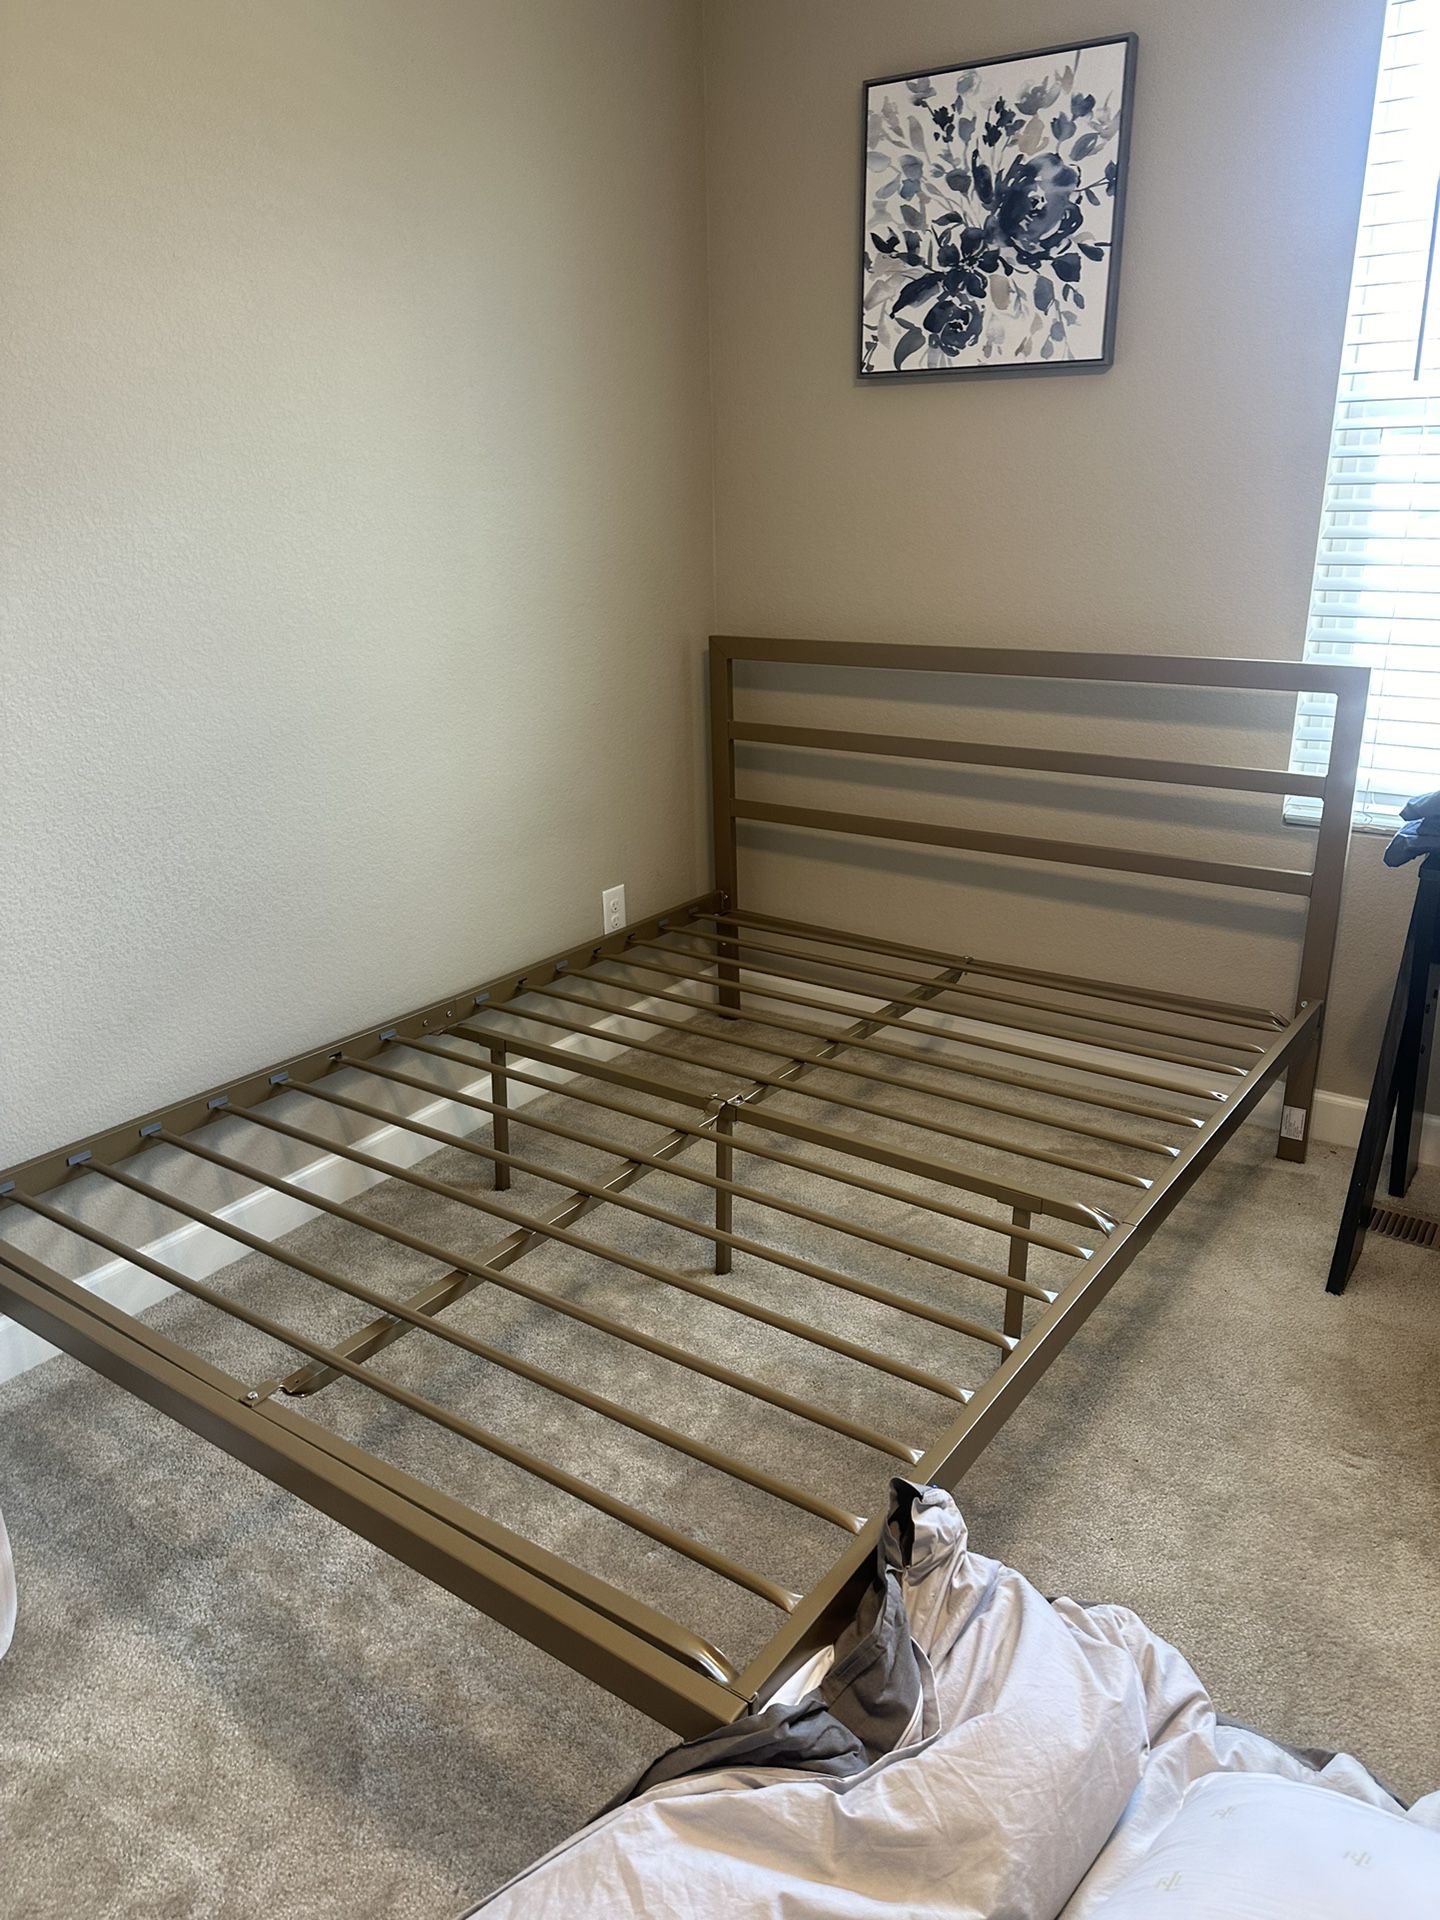 Full/Double Size Bed Frame